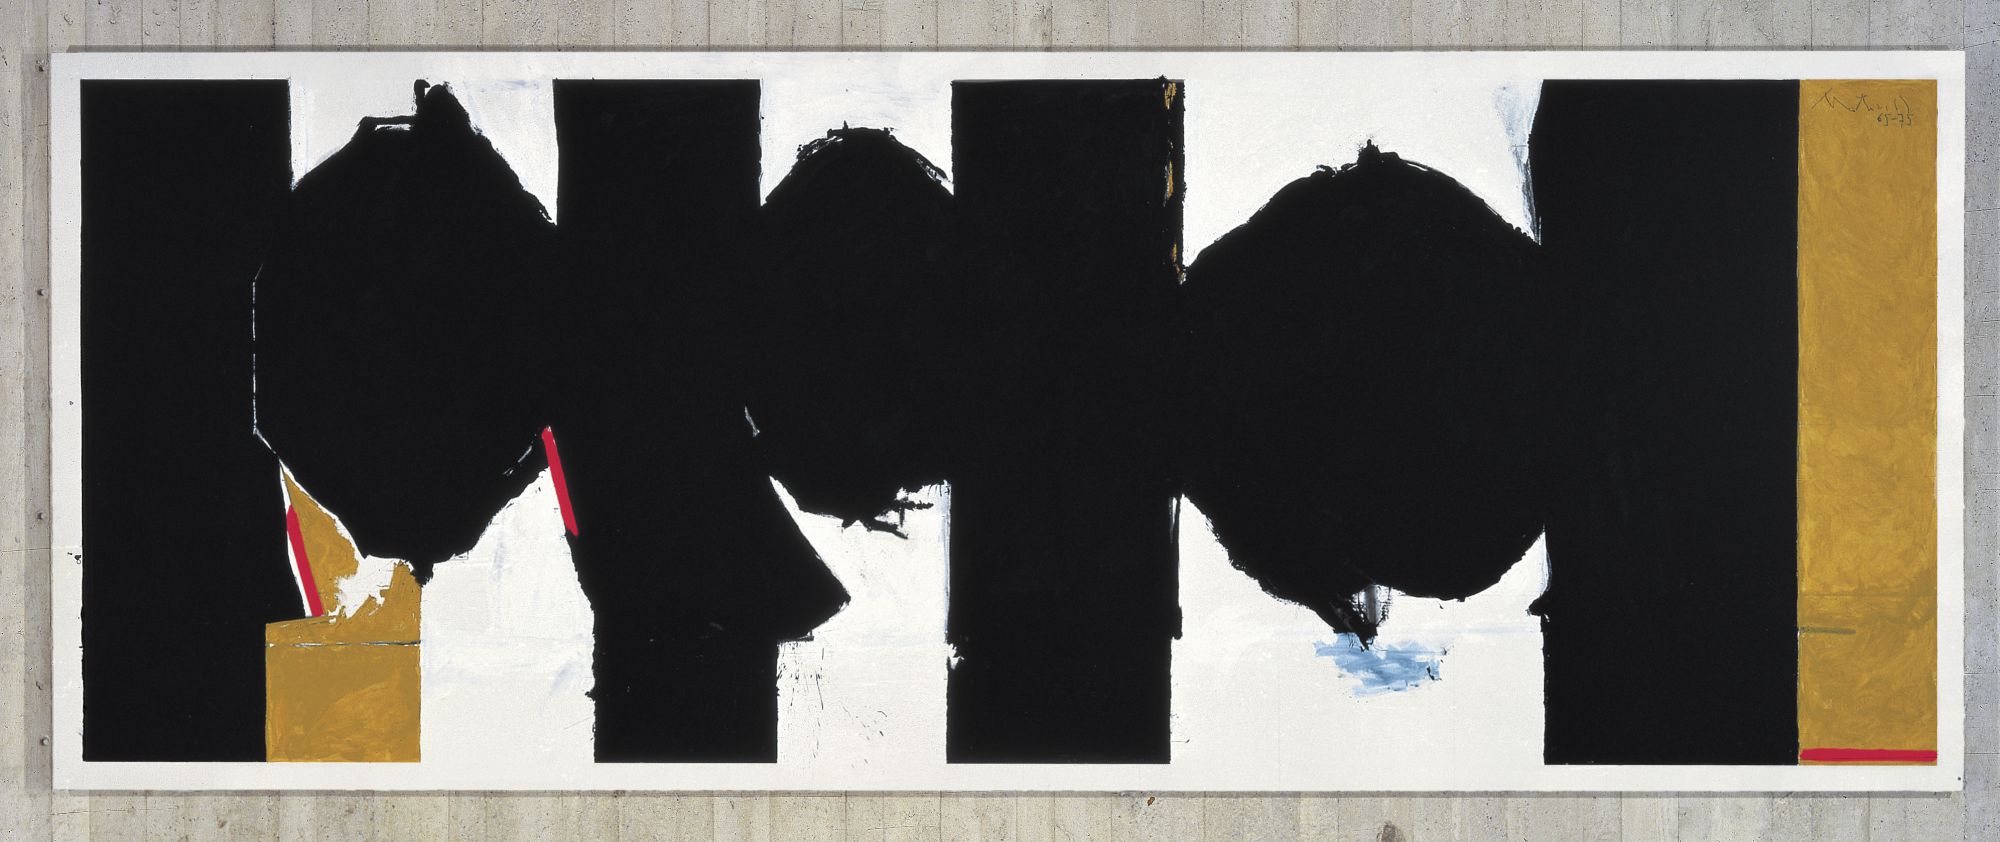 Elegy to the Spanish Republic No. 126, 1975, acrylic on canvas, 77 3/4 ✕ 200 1/4 in. (197.5 ✕ 508.6 cm)